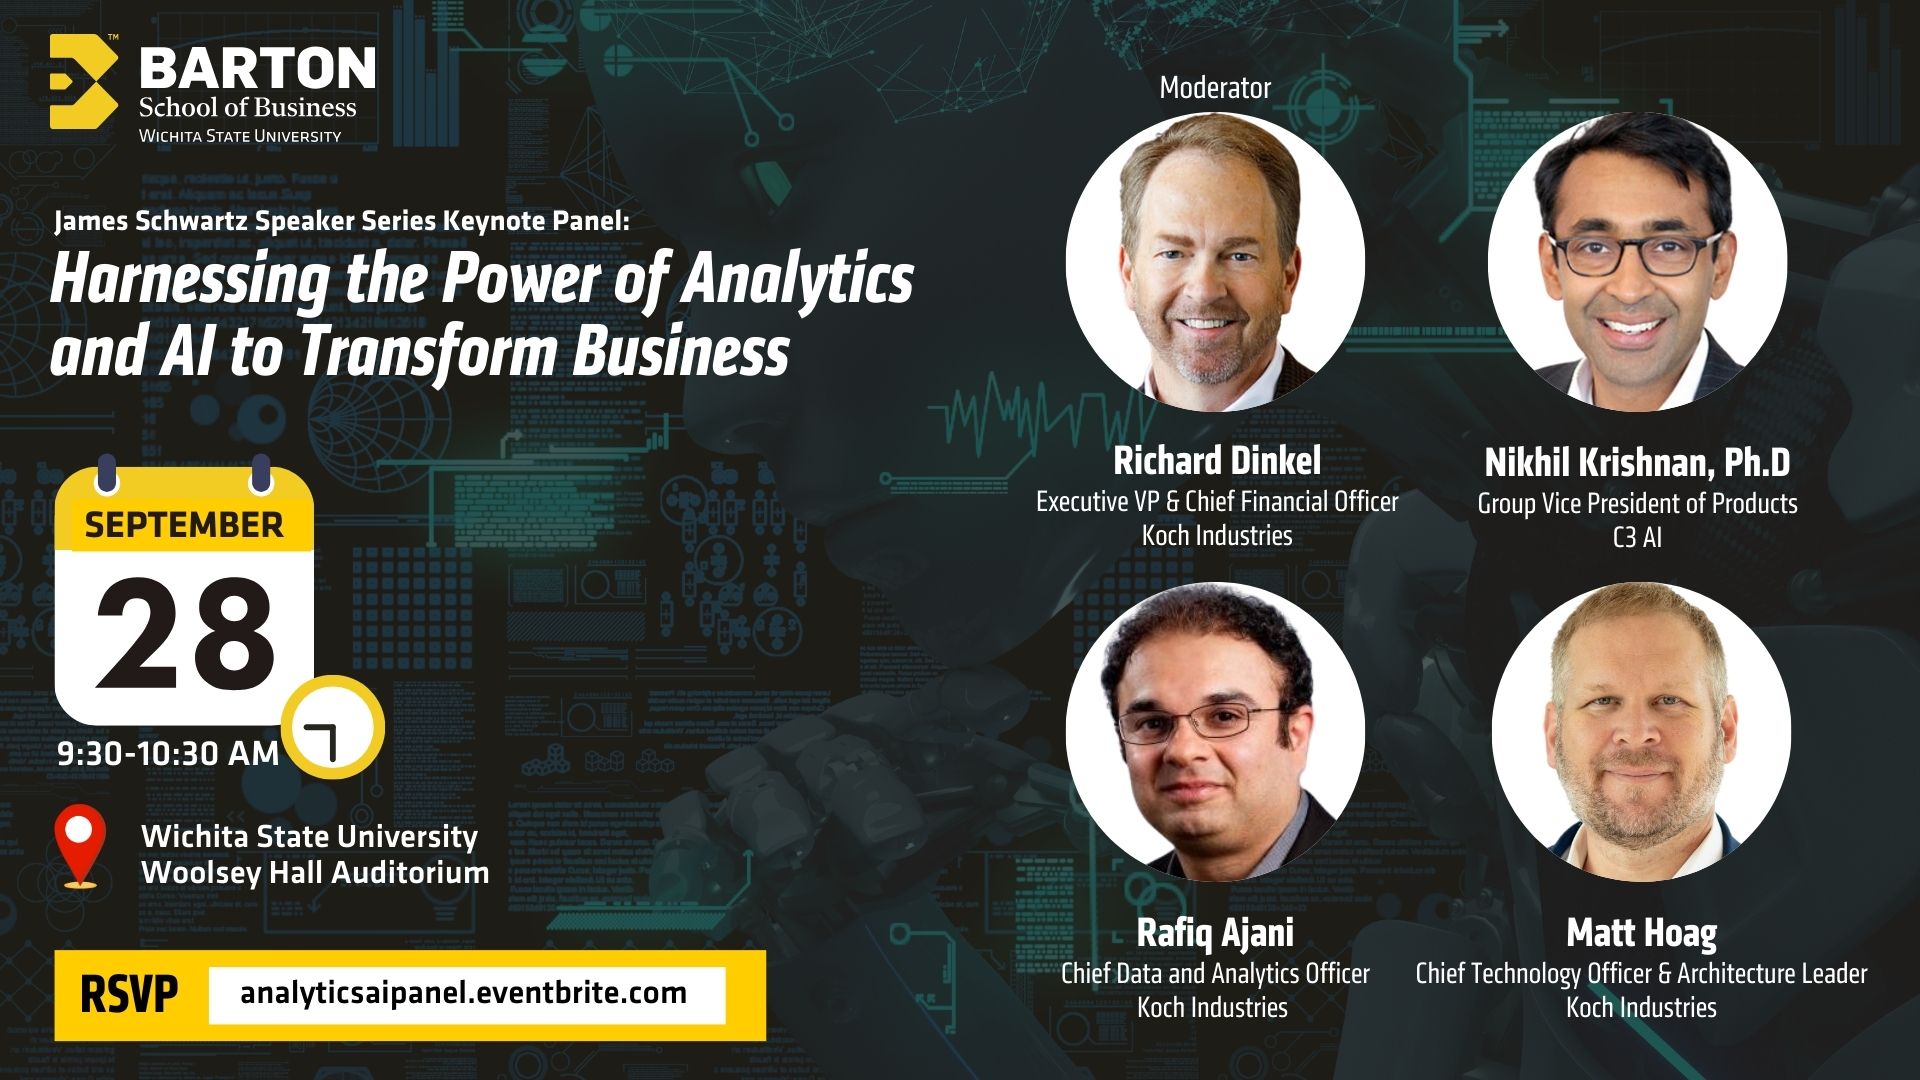  Barton School Announces Keynote Panel of Experts on  Analytics and Artificial Intelligence